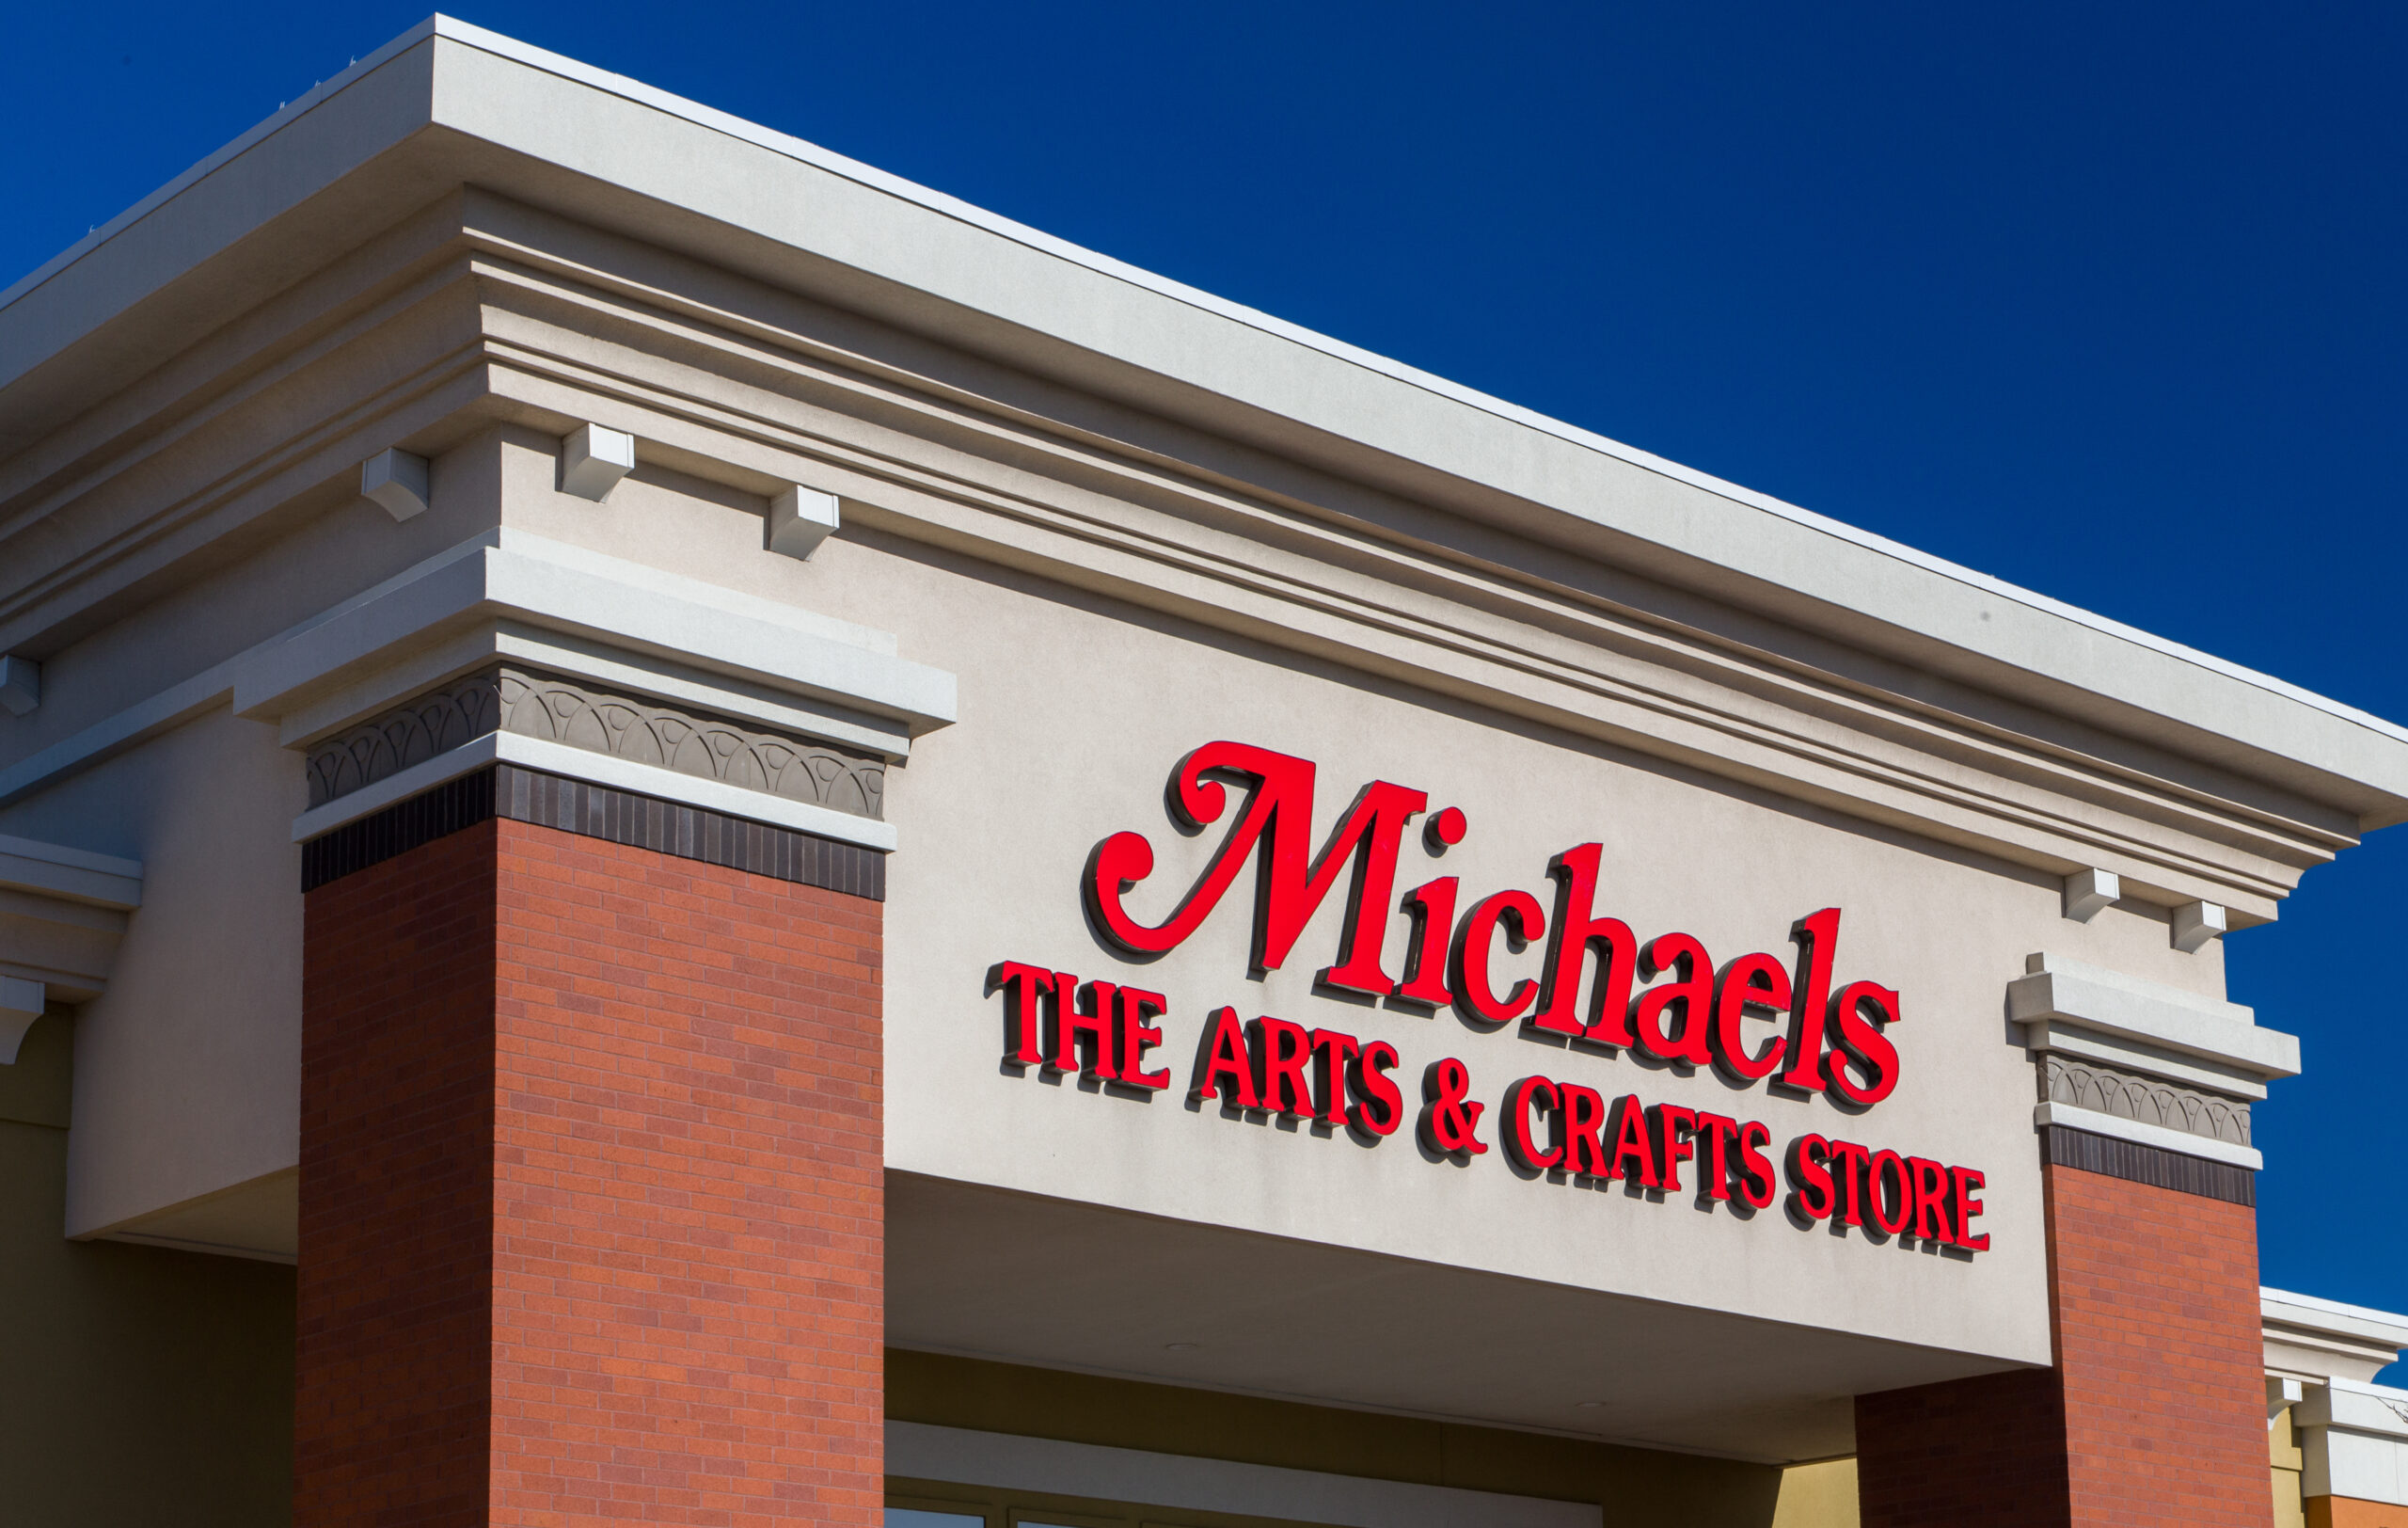 access to michaels crafts store denied